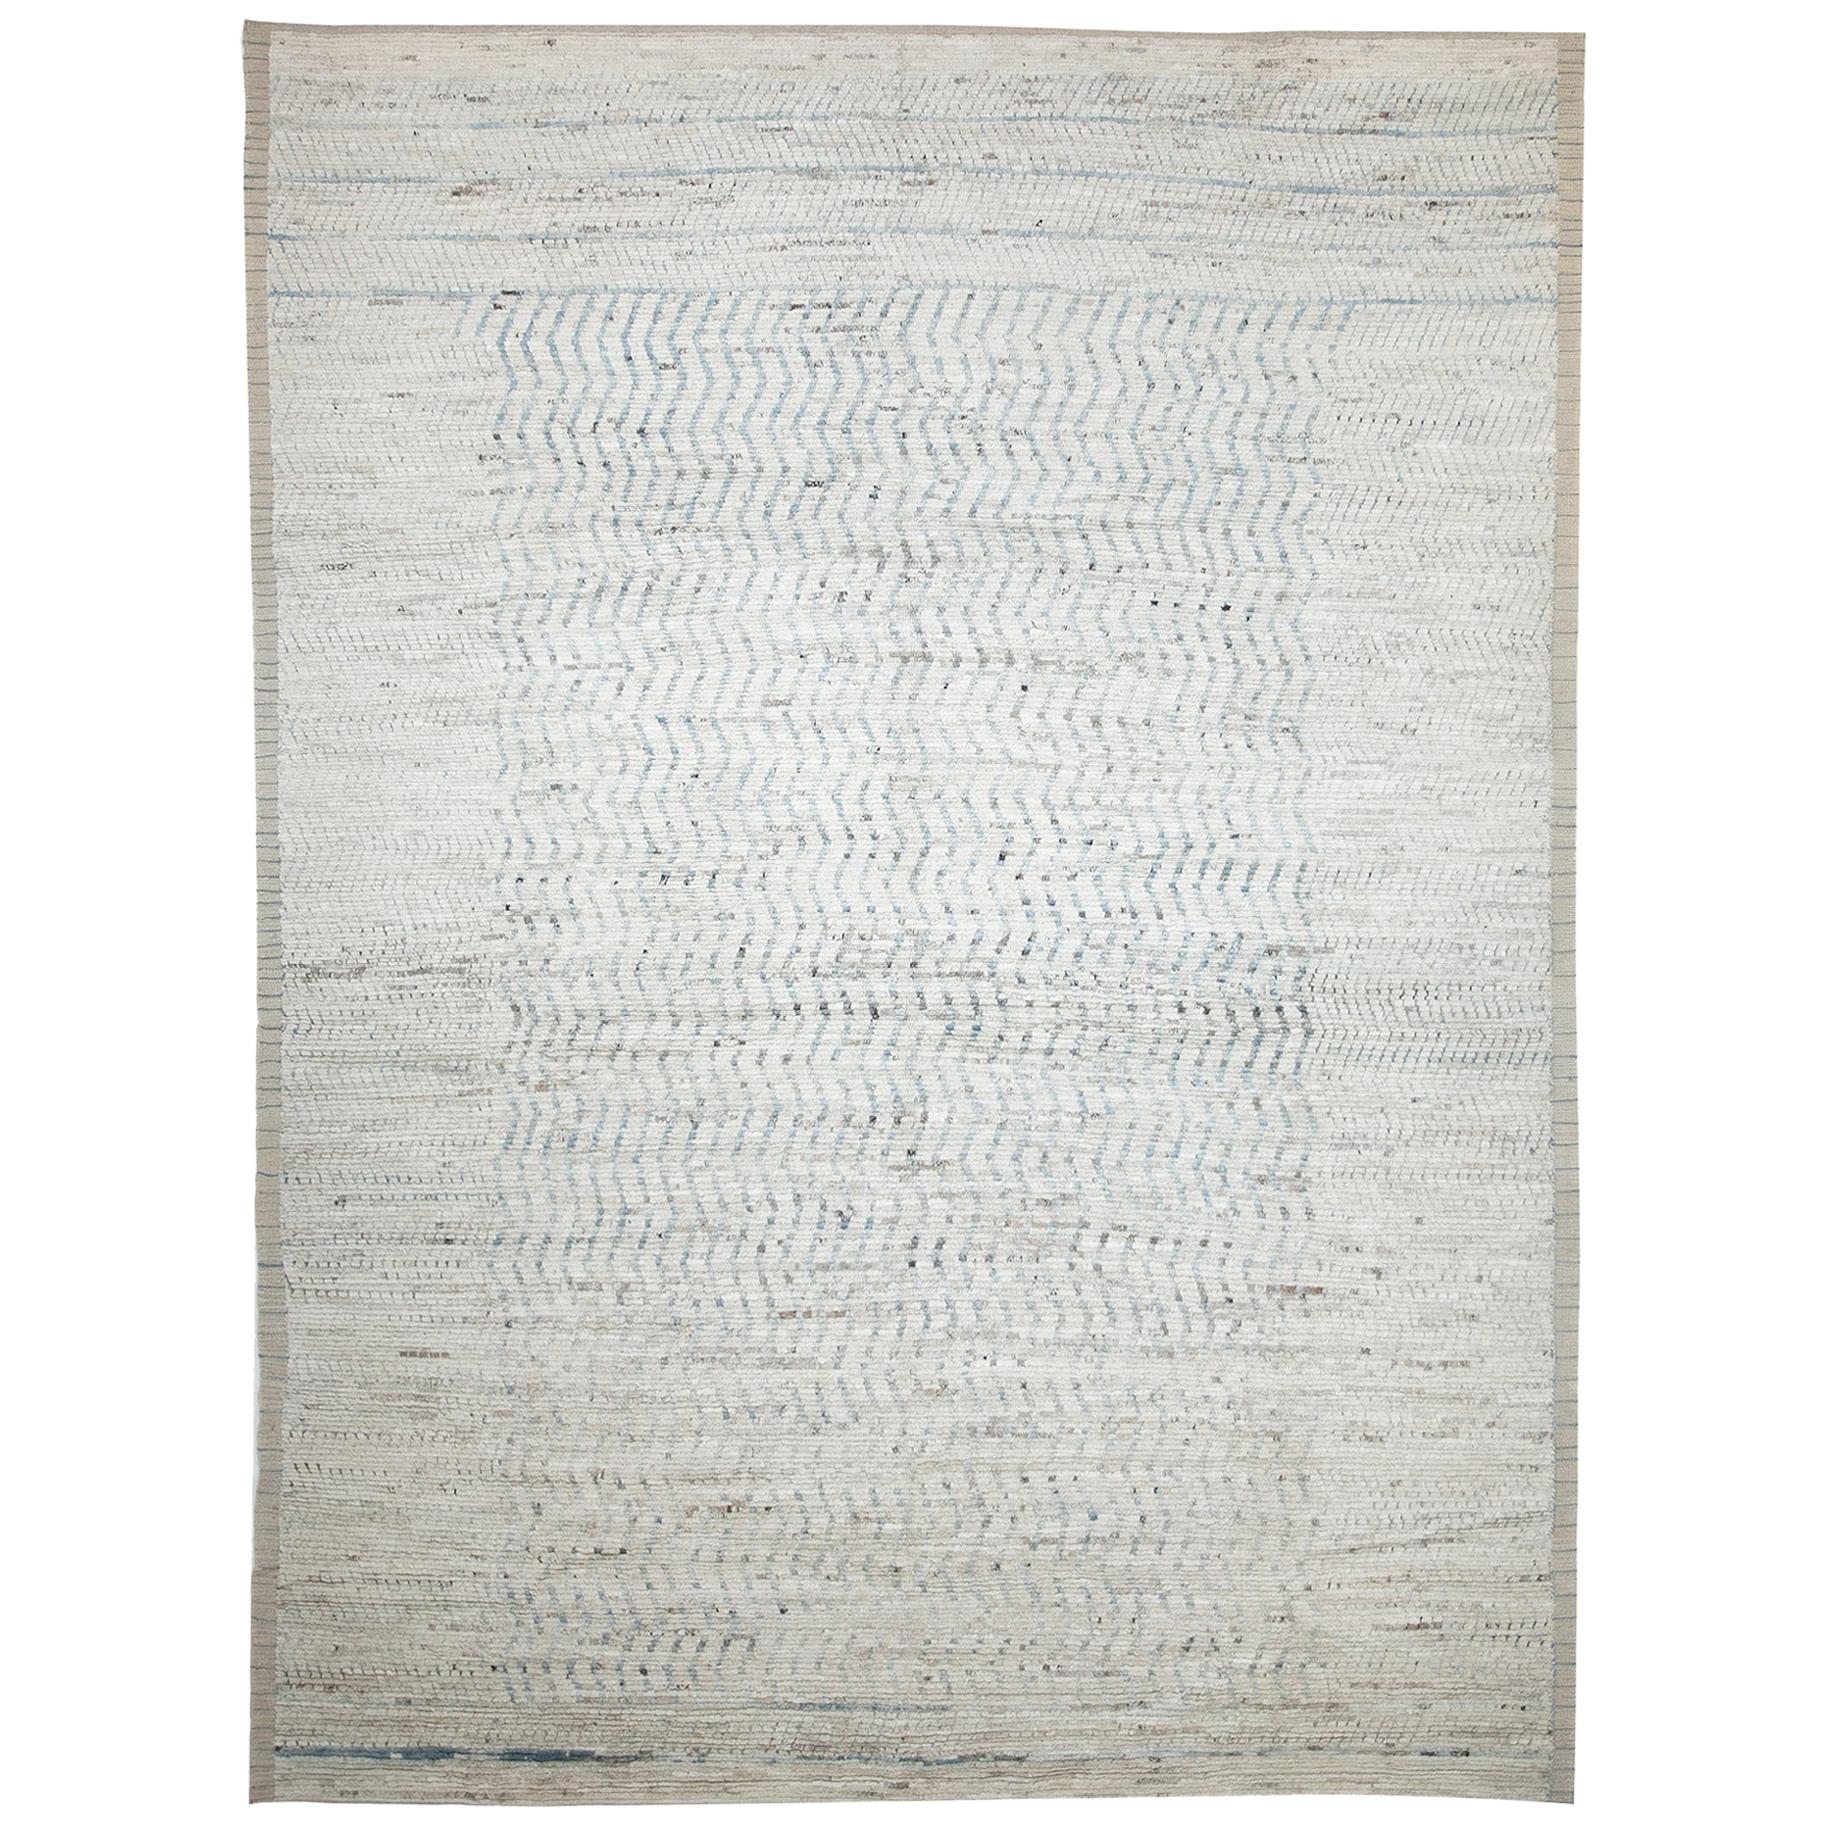 Nazmiyal Collection Cream Modern Moroccan Style Rug. Size: 10 ft x 13 ft 9 in